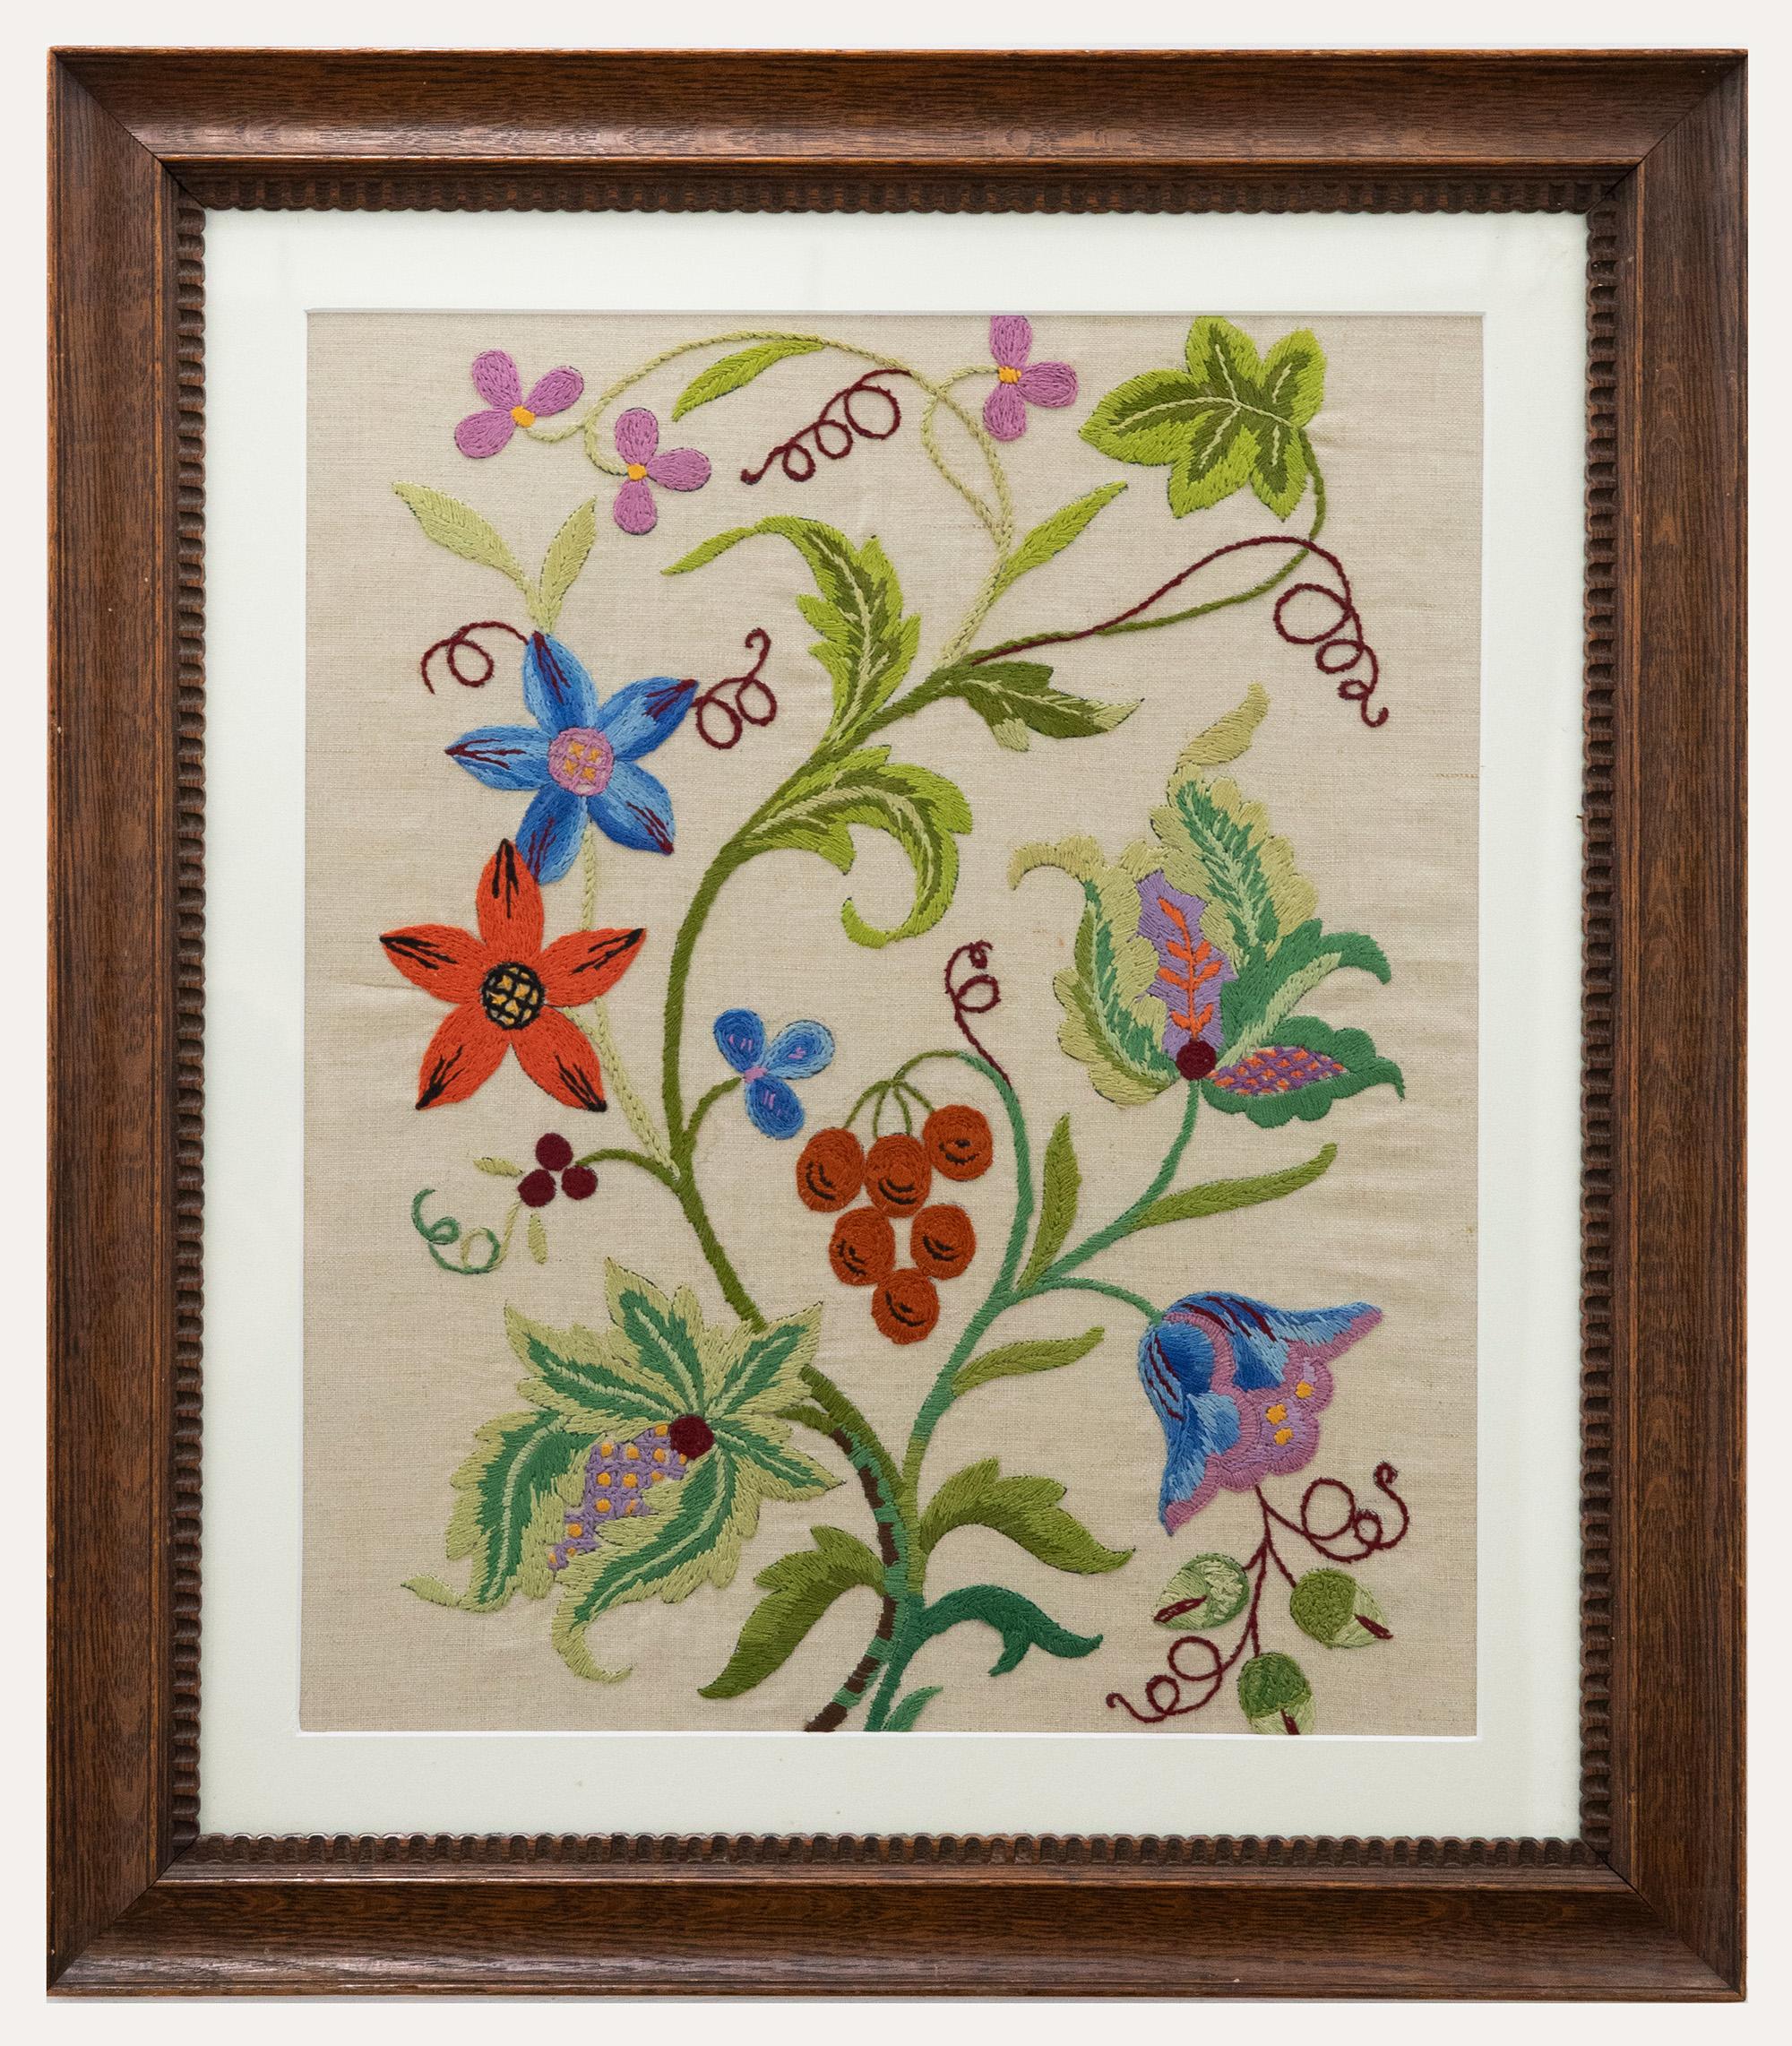 Framed 20th Century Embroidery - Parrot Tulips & Petals - Art by Unknown